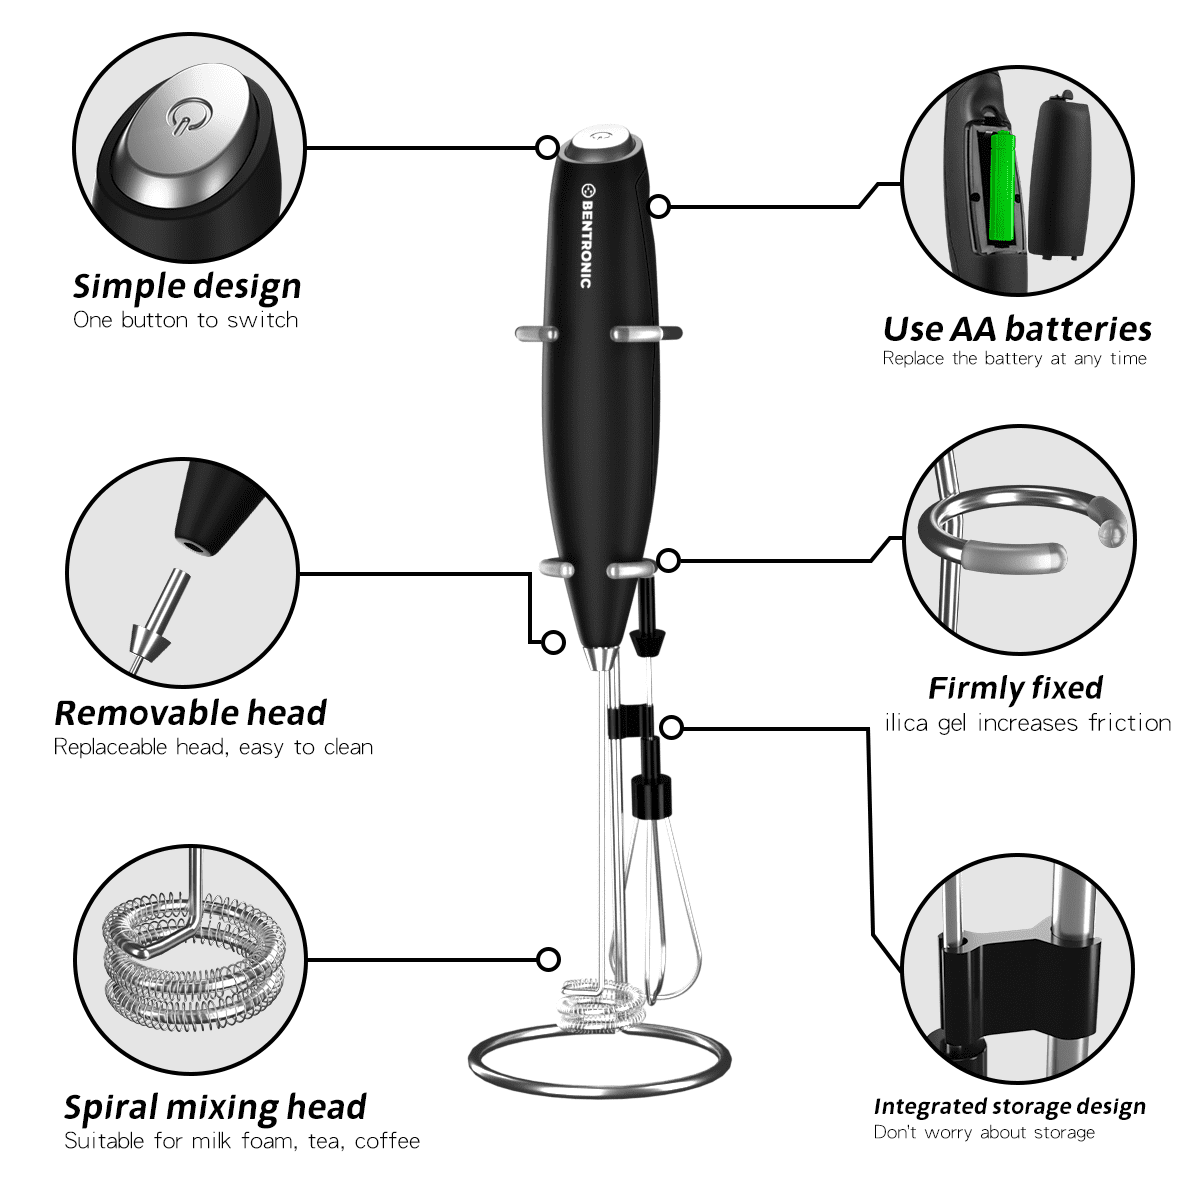 Double Whisk Milk Frother, Handheld Electric Blender stick, Drink Mixer  with Food Grade Stainless Steel Stirrer, Battery Operated Foam Maker for